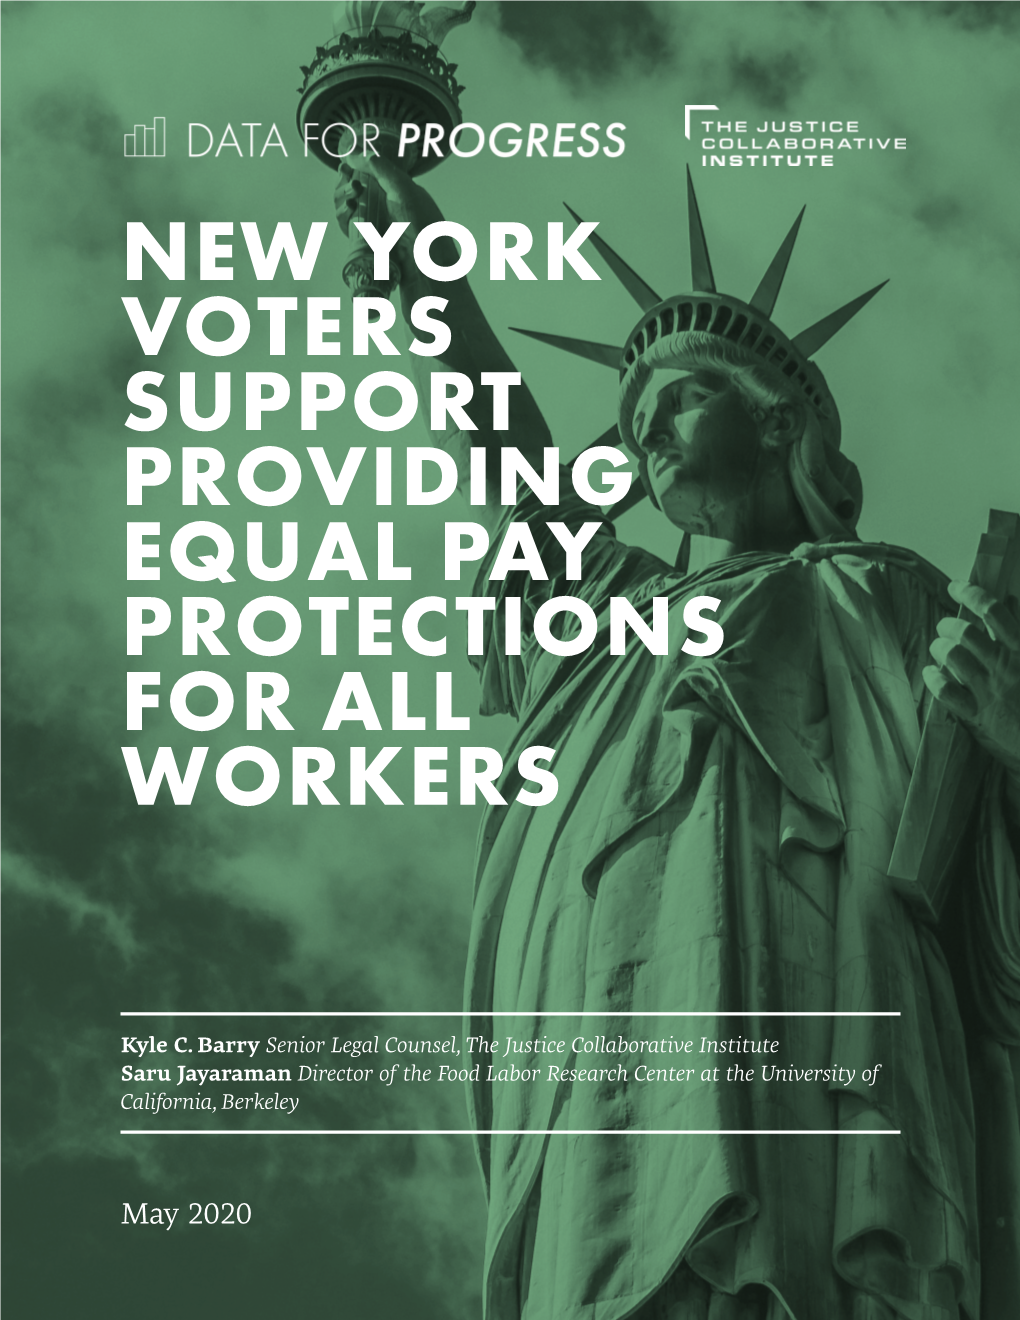 New York Voters Support Providing Equal Pay Protections for All Workers